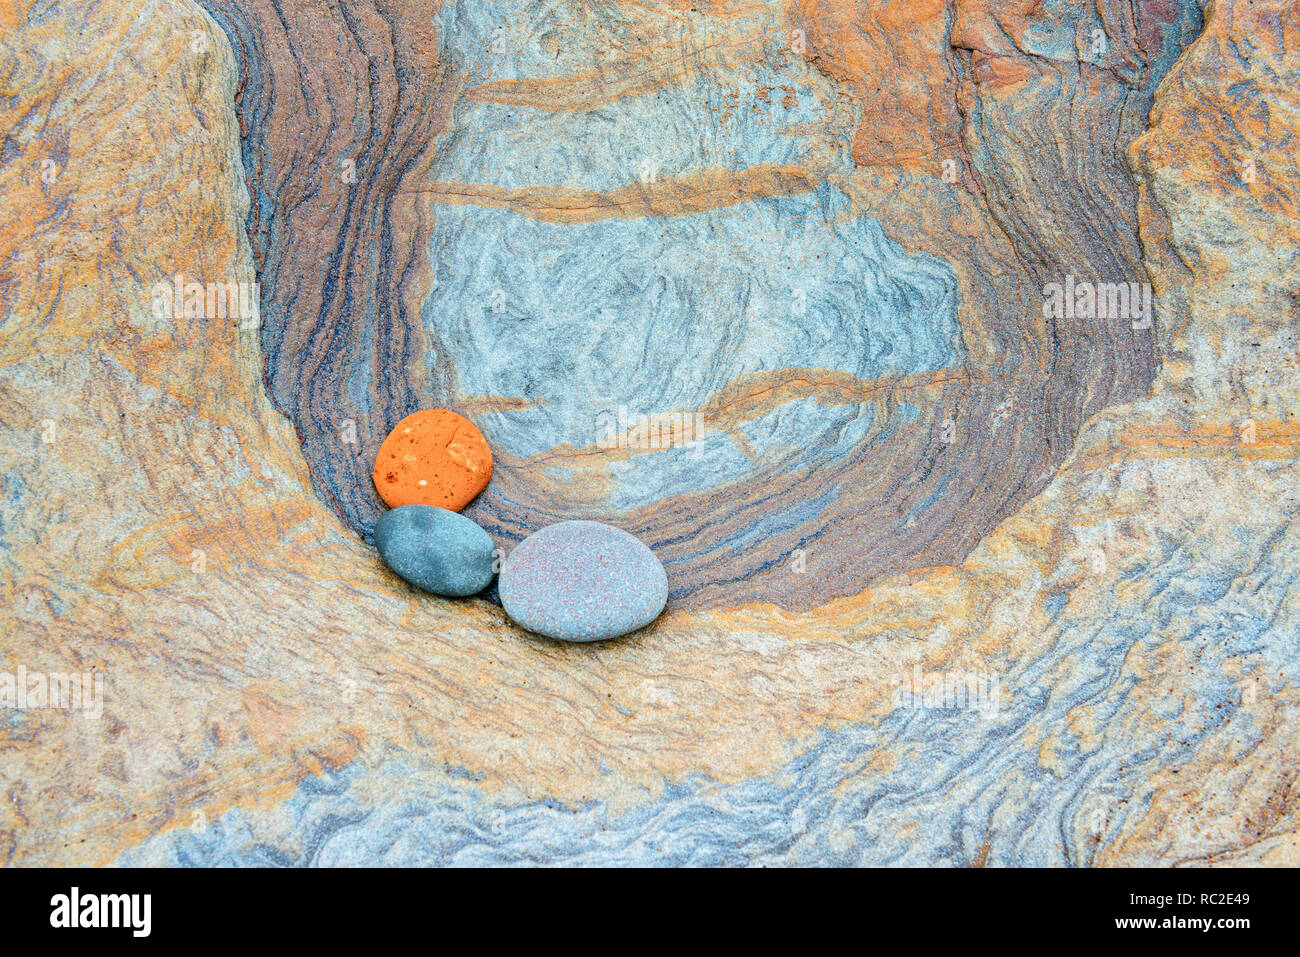 Colourful patterns created by sea erosion of rocks revealed at low tide on Spittal Beach. one say that the colours are caused by iron ore deposits. Stock Photo